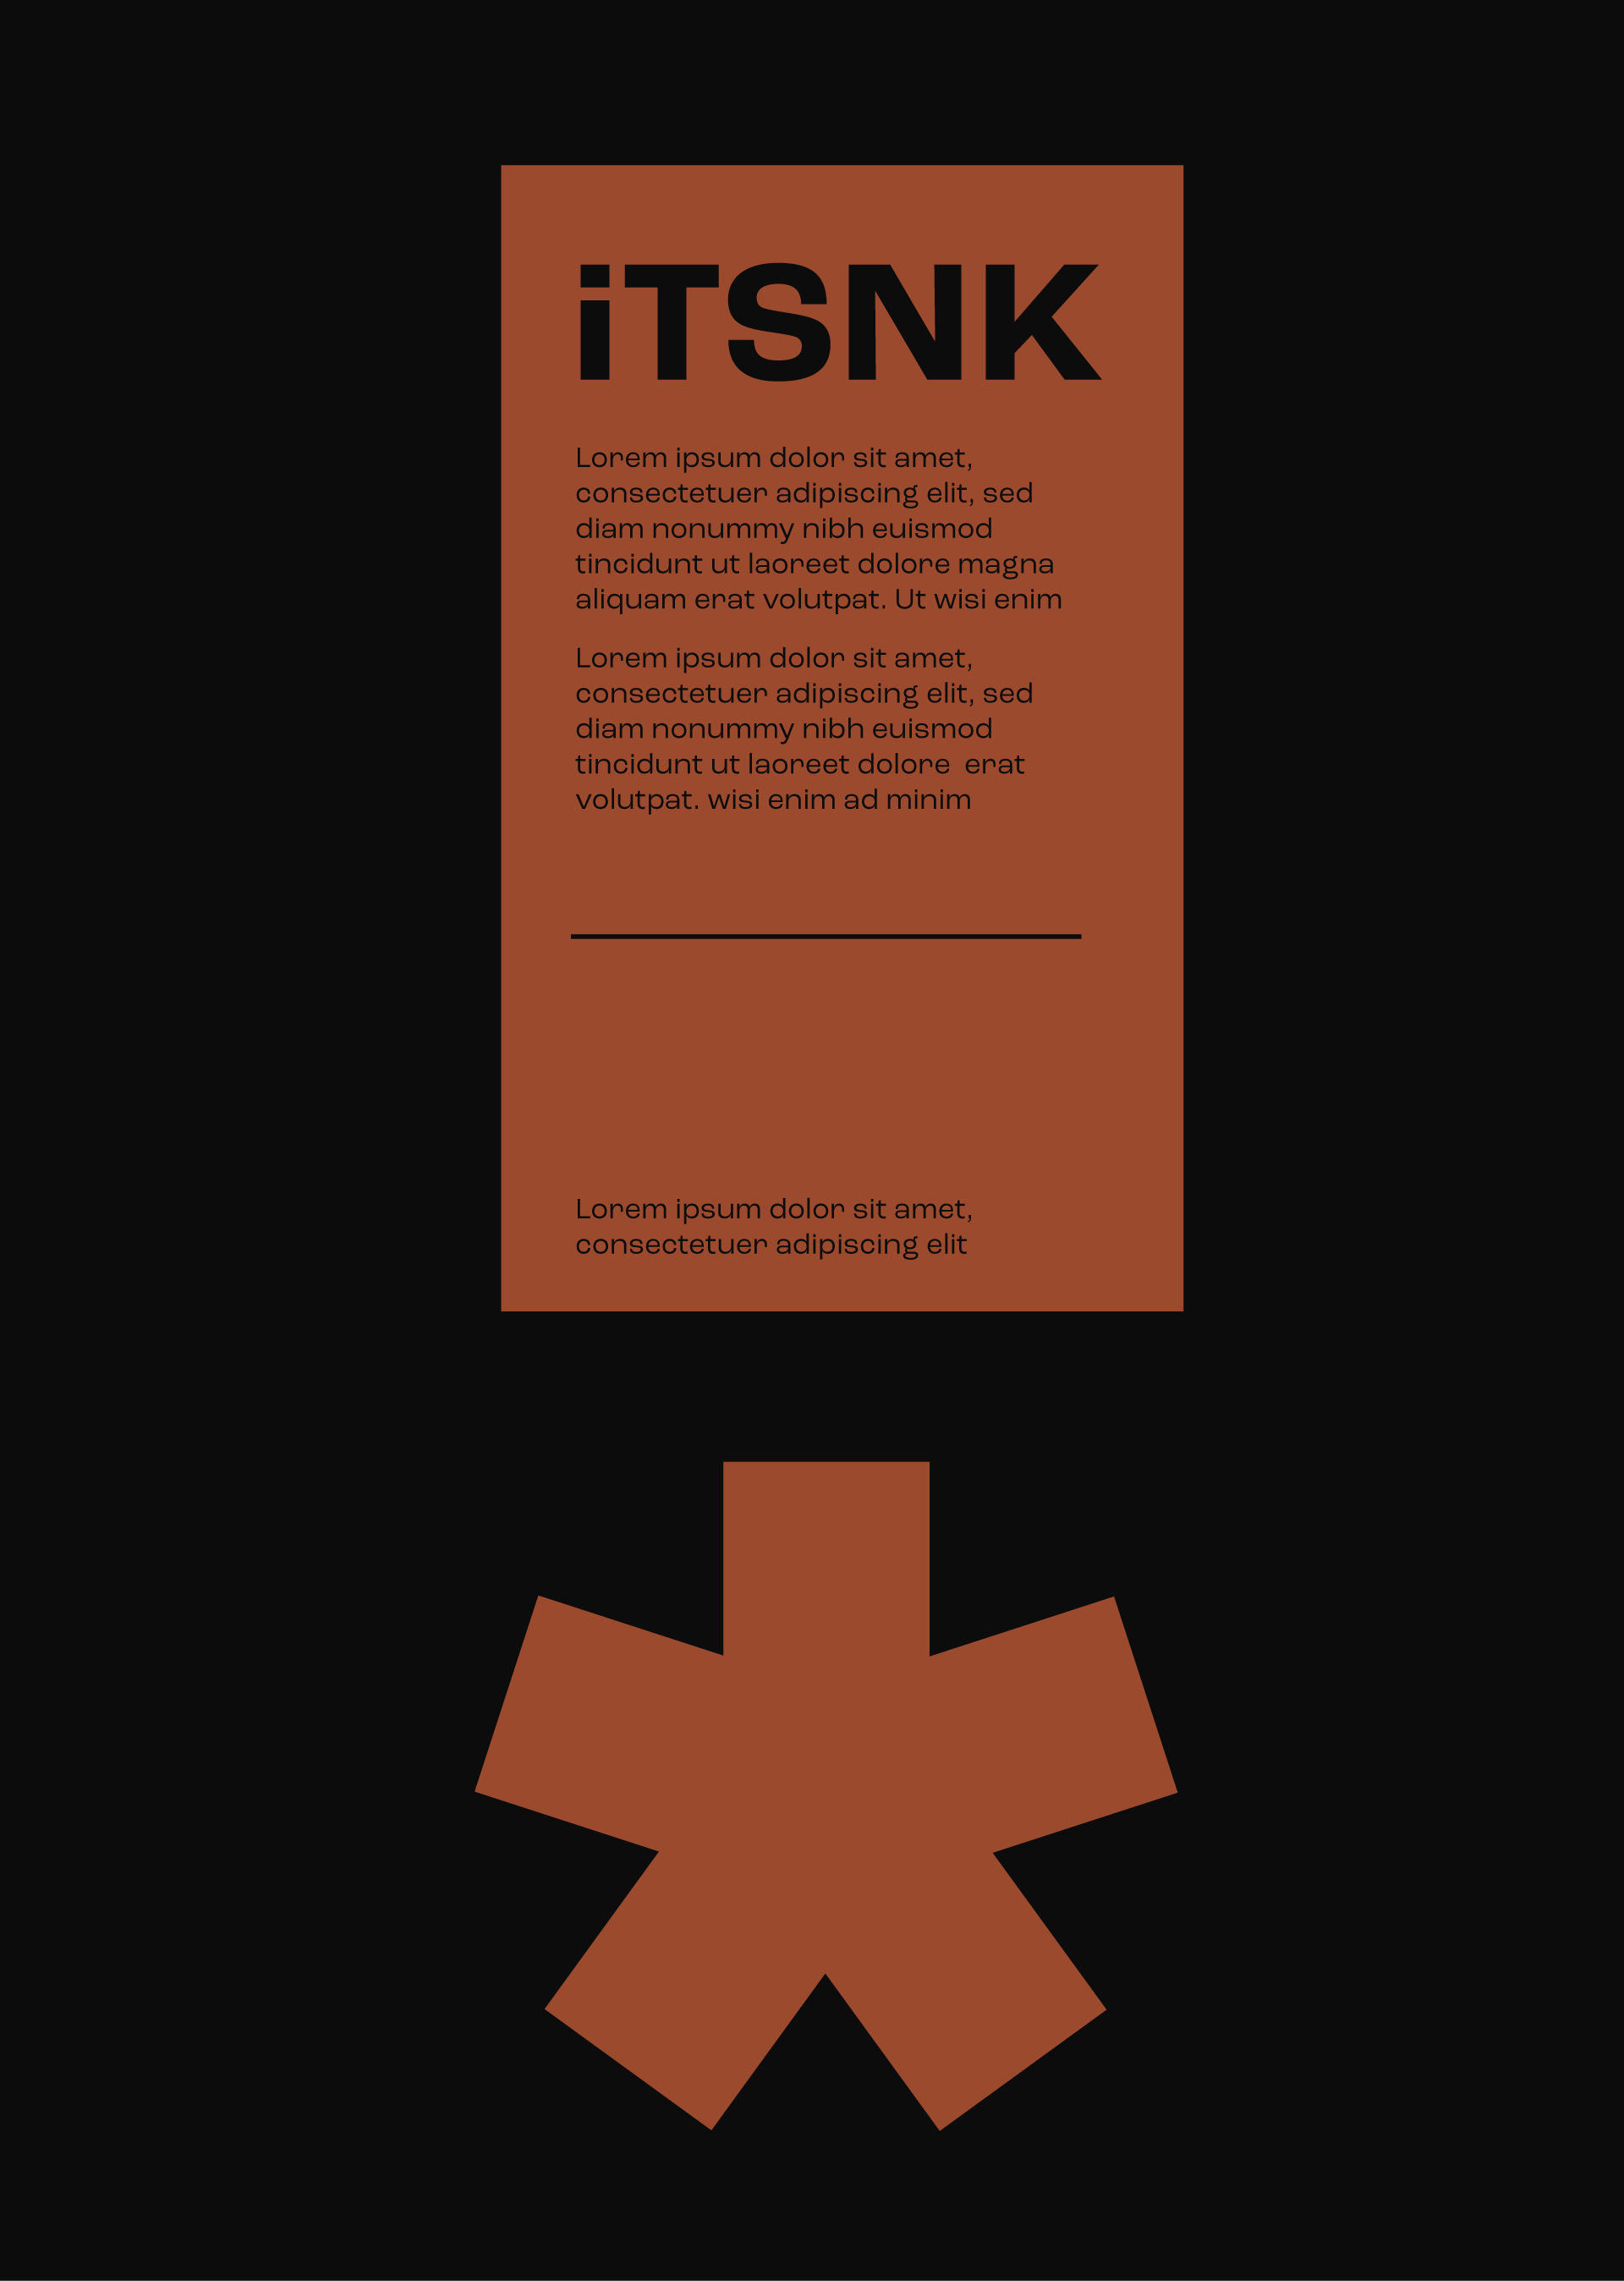 Itsnk Poster 1